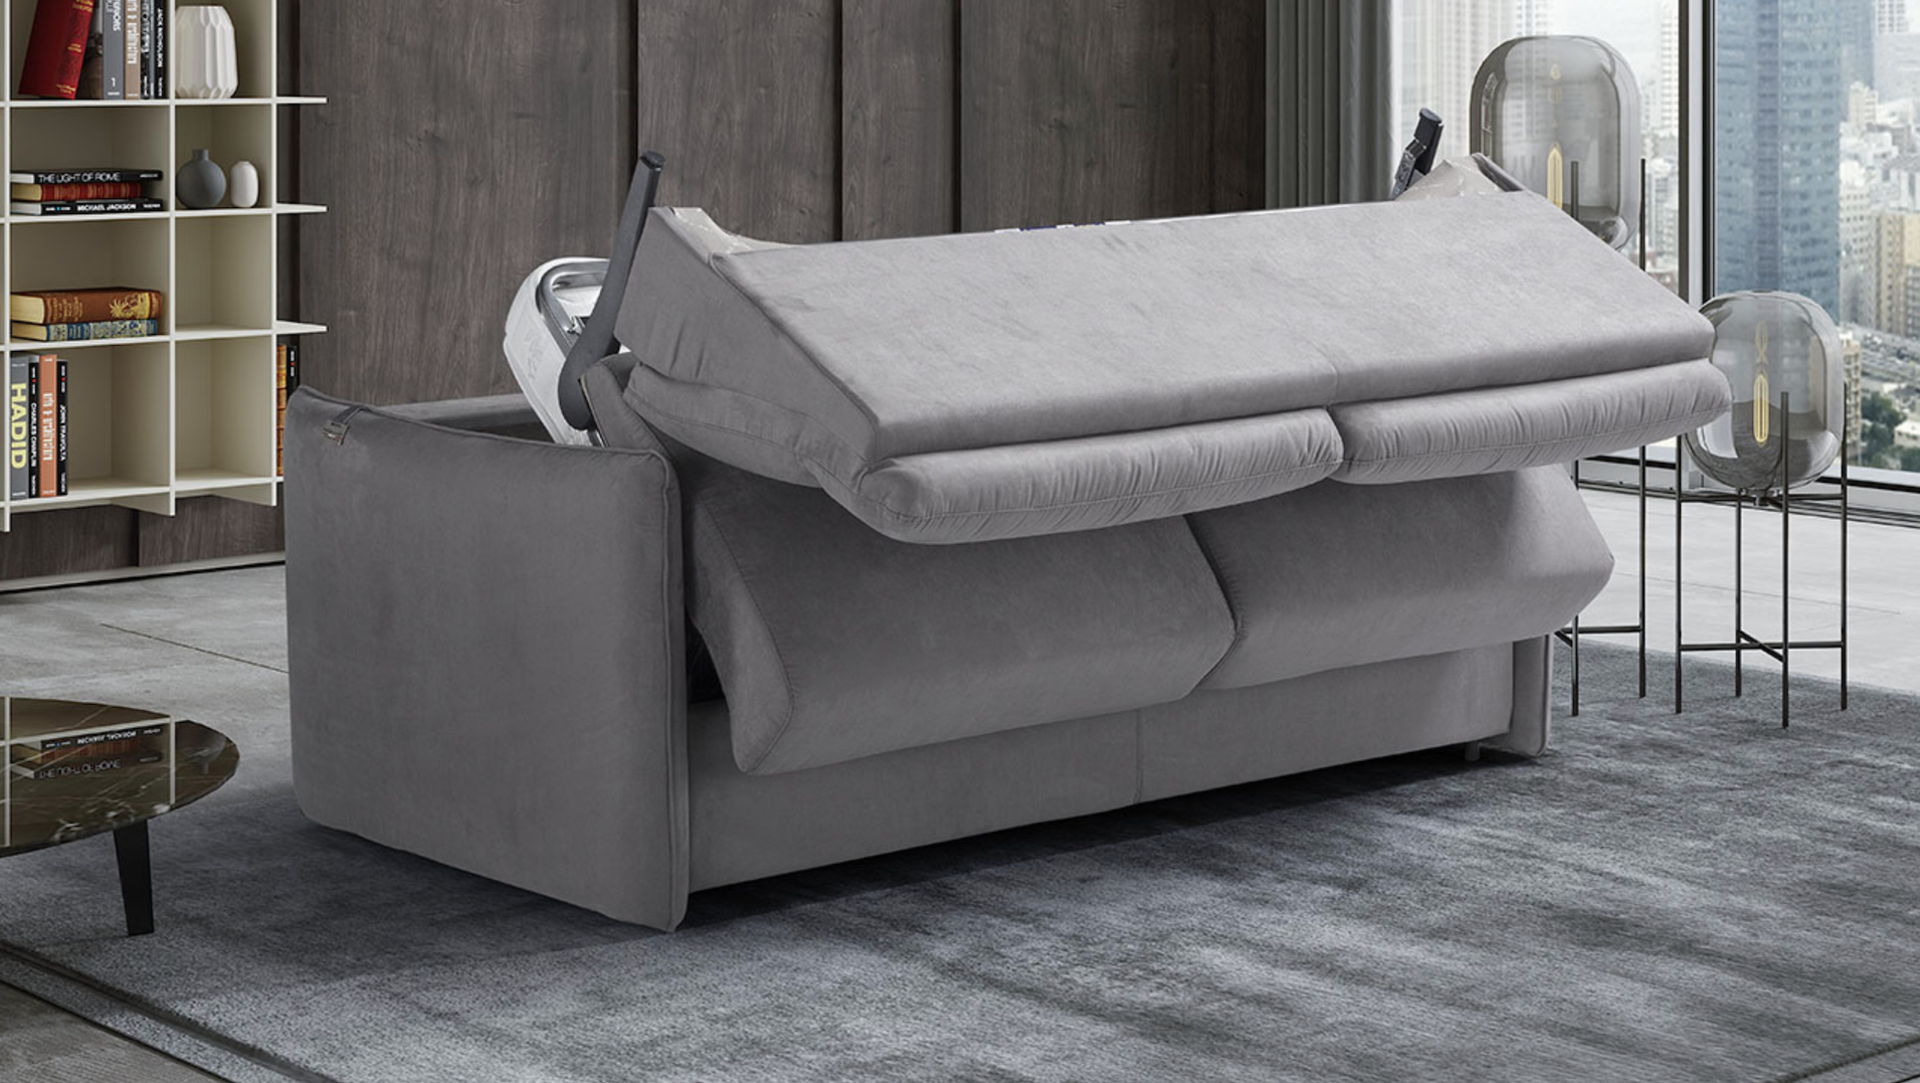 ‘AIMEE’ Italian Crafted 3 Seat Sofa Bed in PLAZA SILVER RRP £1979 - Image 2 of 5